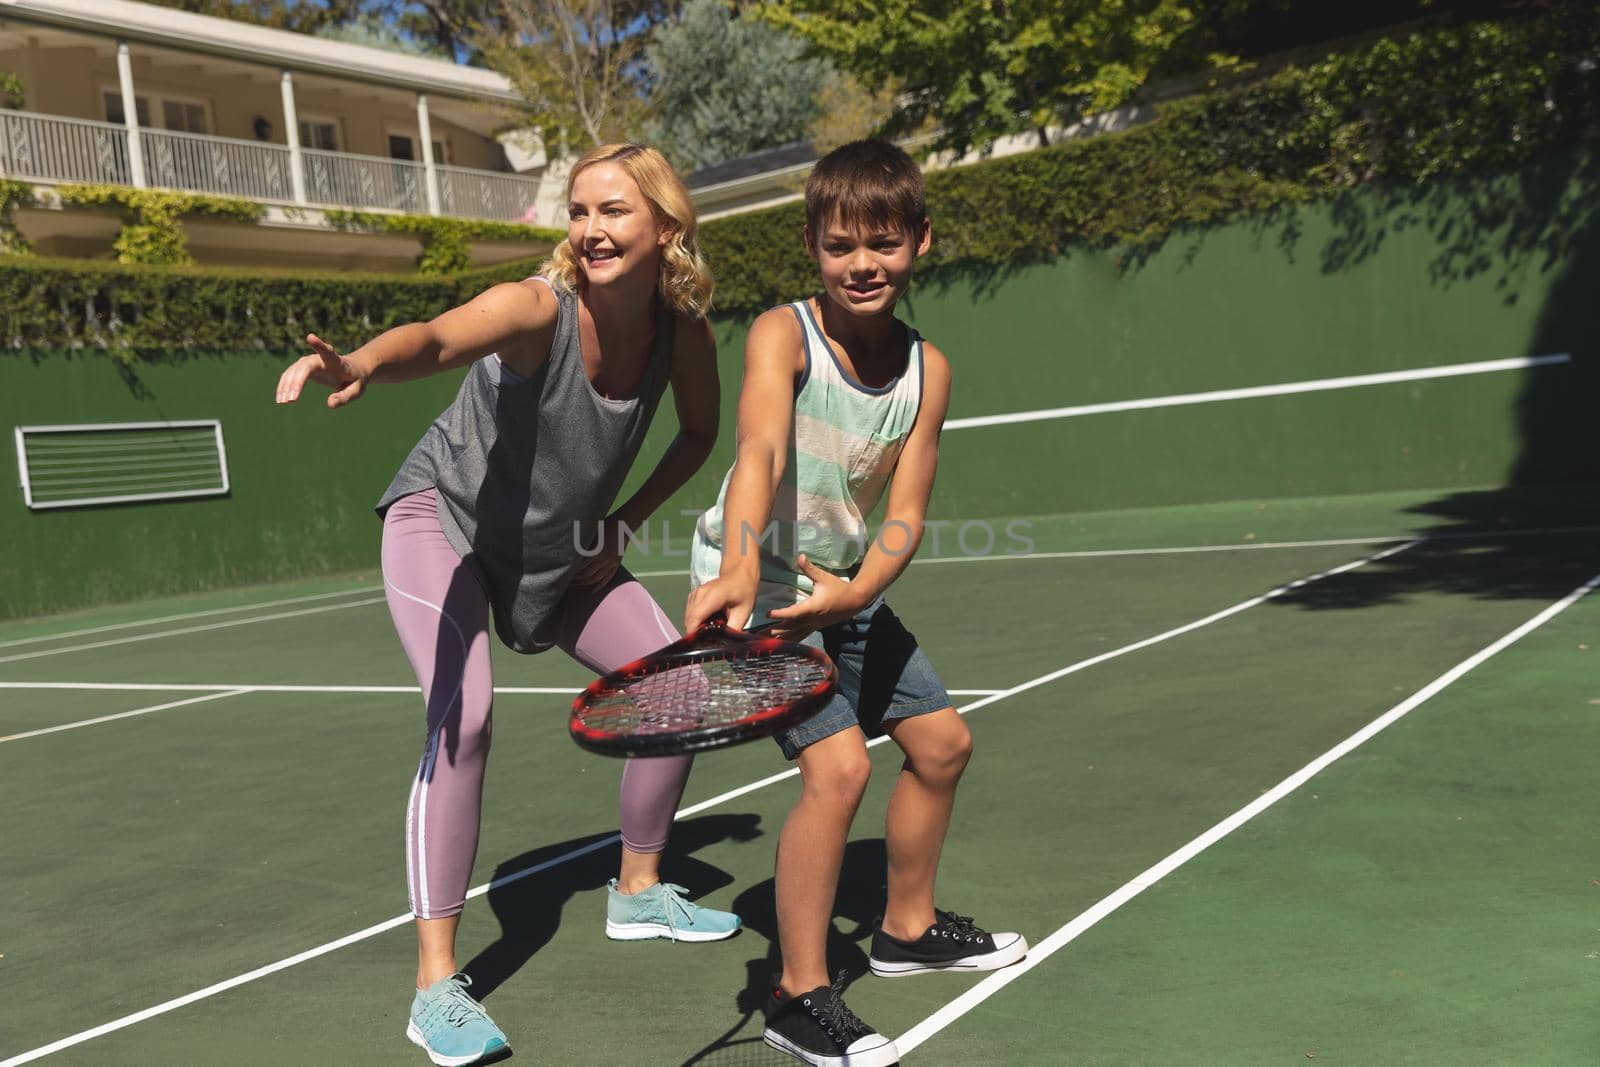 Caucasian mother and son outdoors, playing tennis on tennis court by Wavebreakmedia